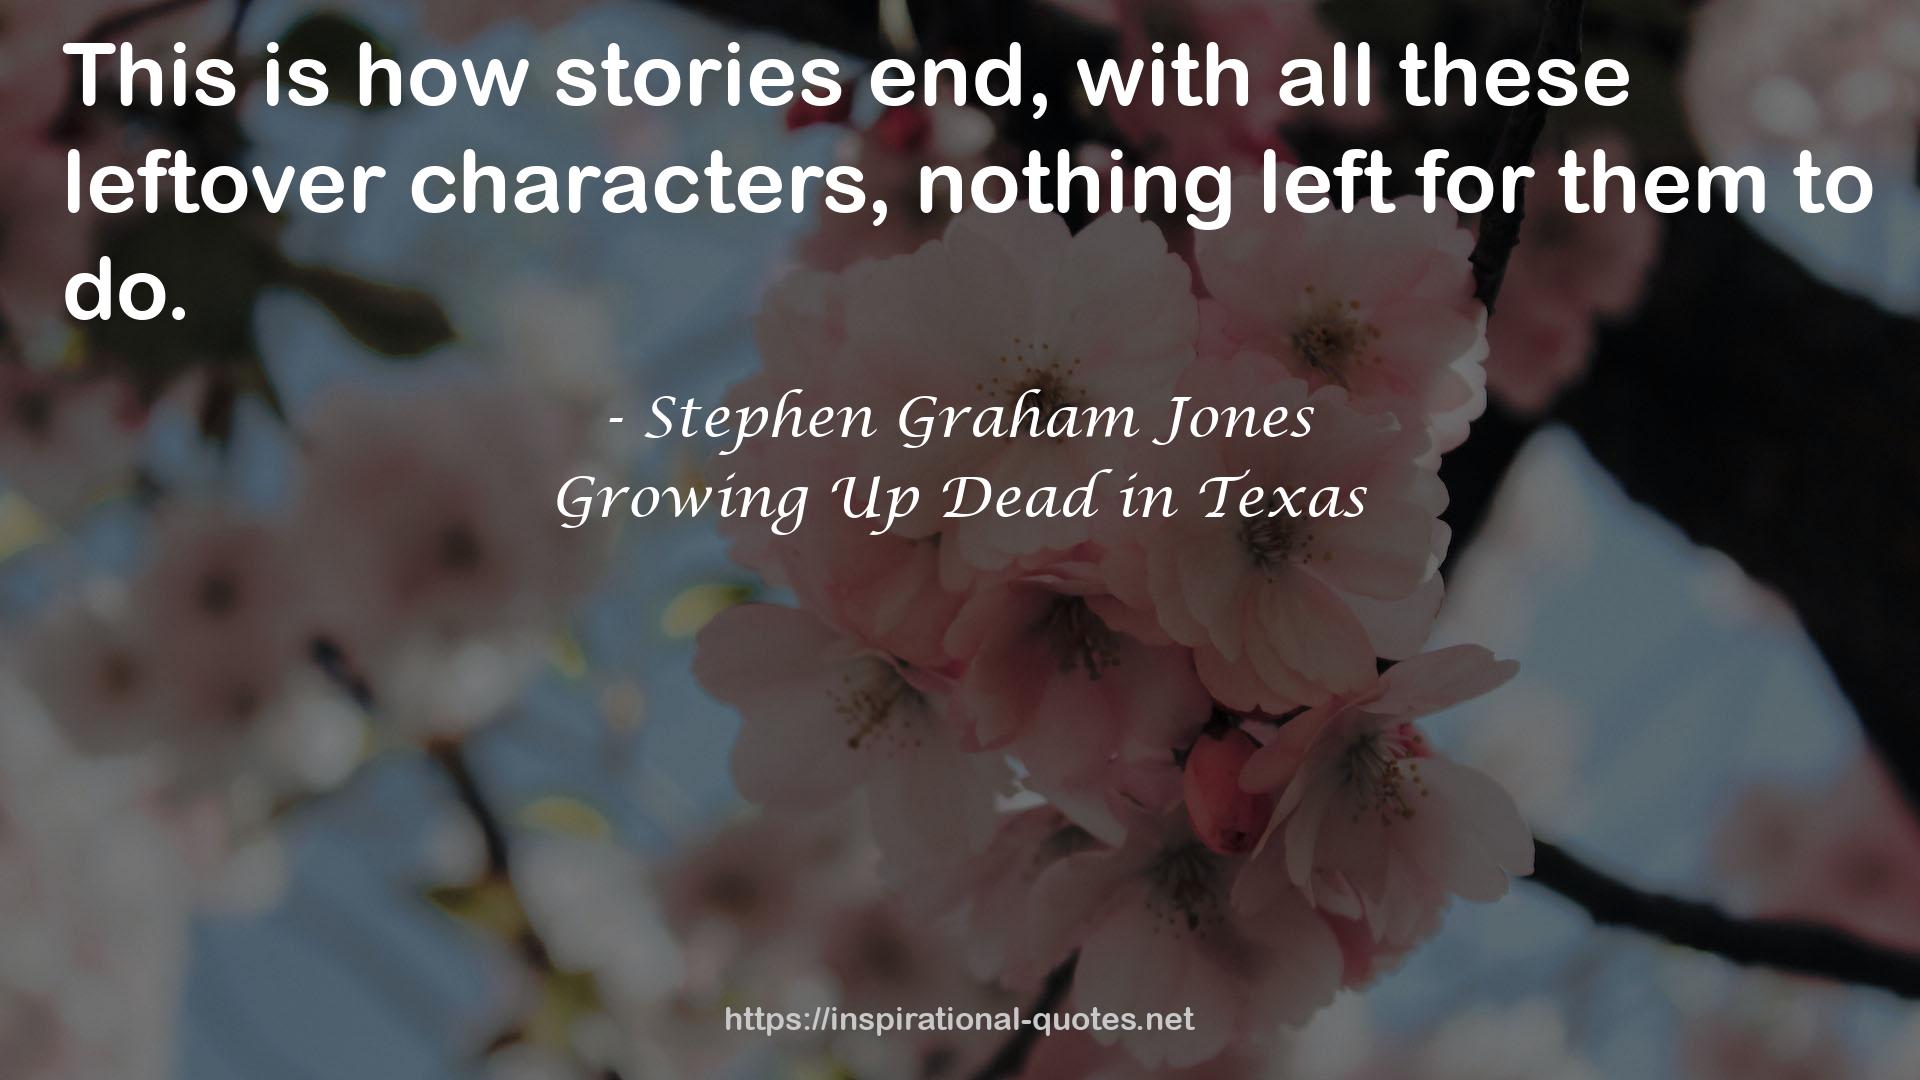 Growing Up Dead in Texas QUOTES